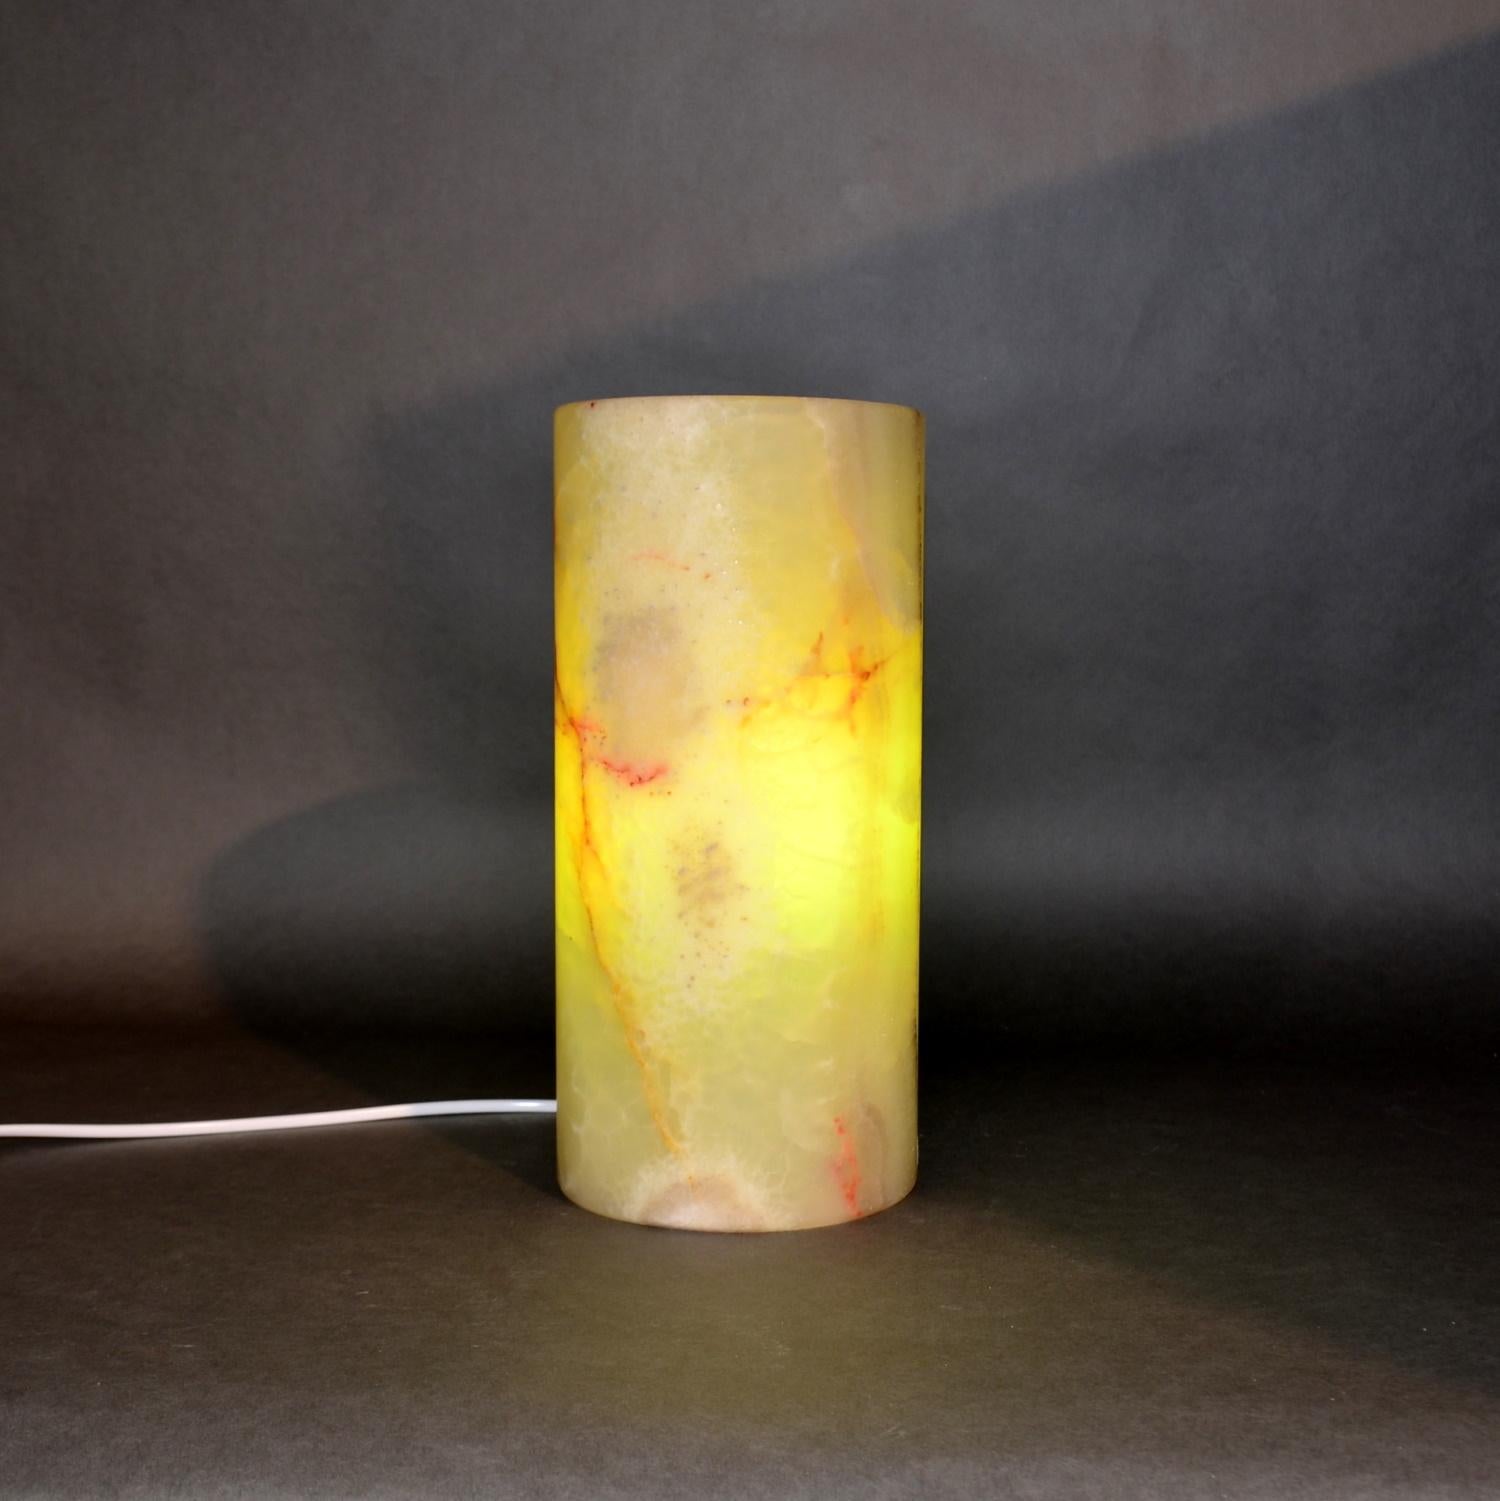 Onyx lamps

Although there are a few other places in the world where the semi-precious stone Onyx exist, we found our collection in Mexico.

A bit of information on The Semi-Precious Stone Onyx.
While it is often thought of as the black